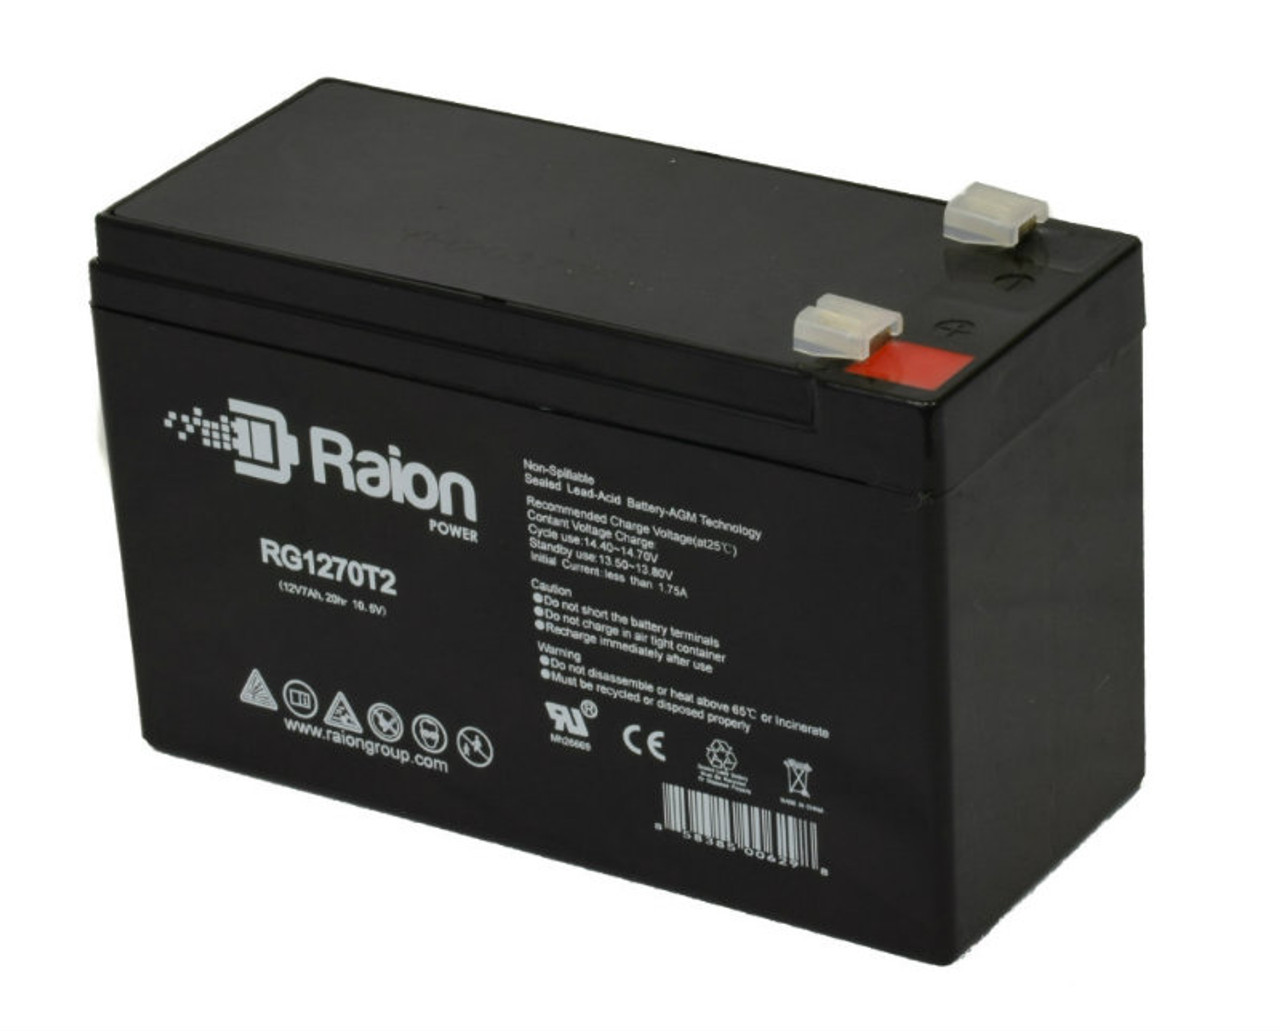 Raion Power Replacement 12V 7Ah RG1270T1 Fire Alarm Battery for Altronix SMP5PMCTXPD8